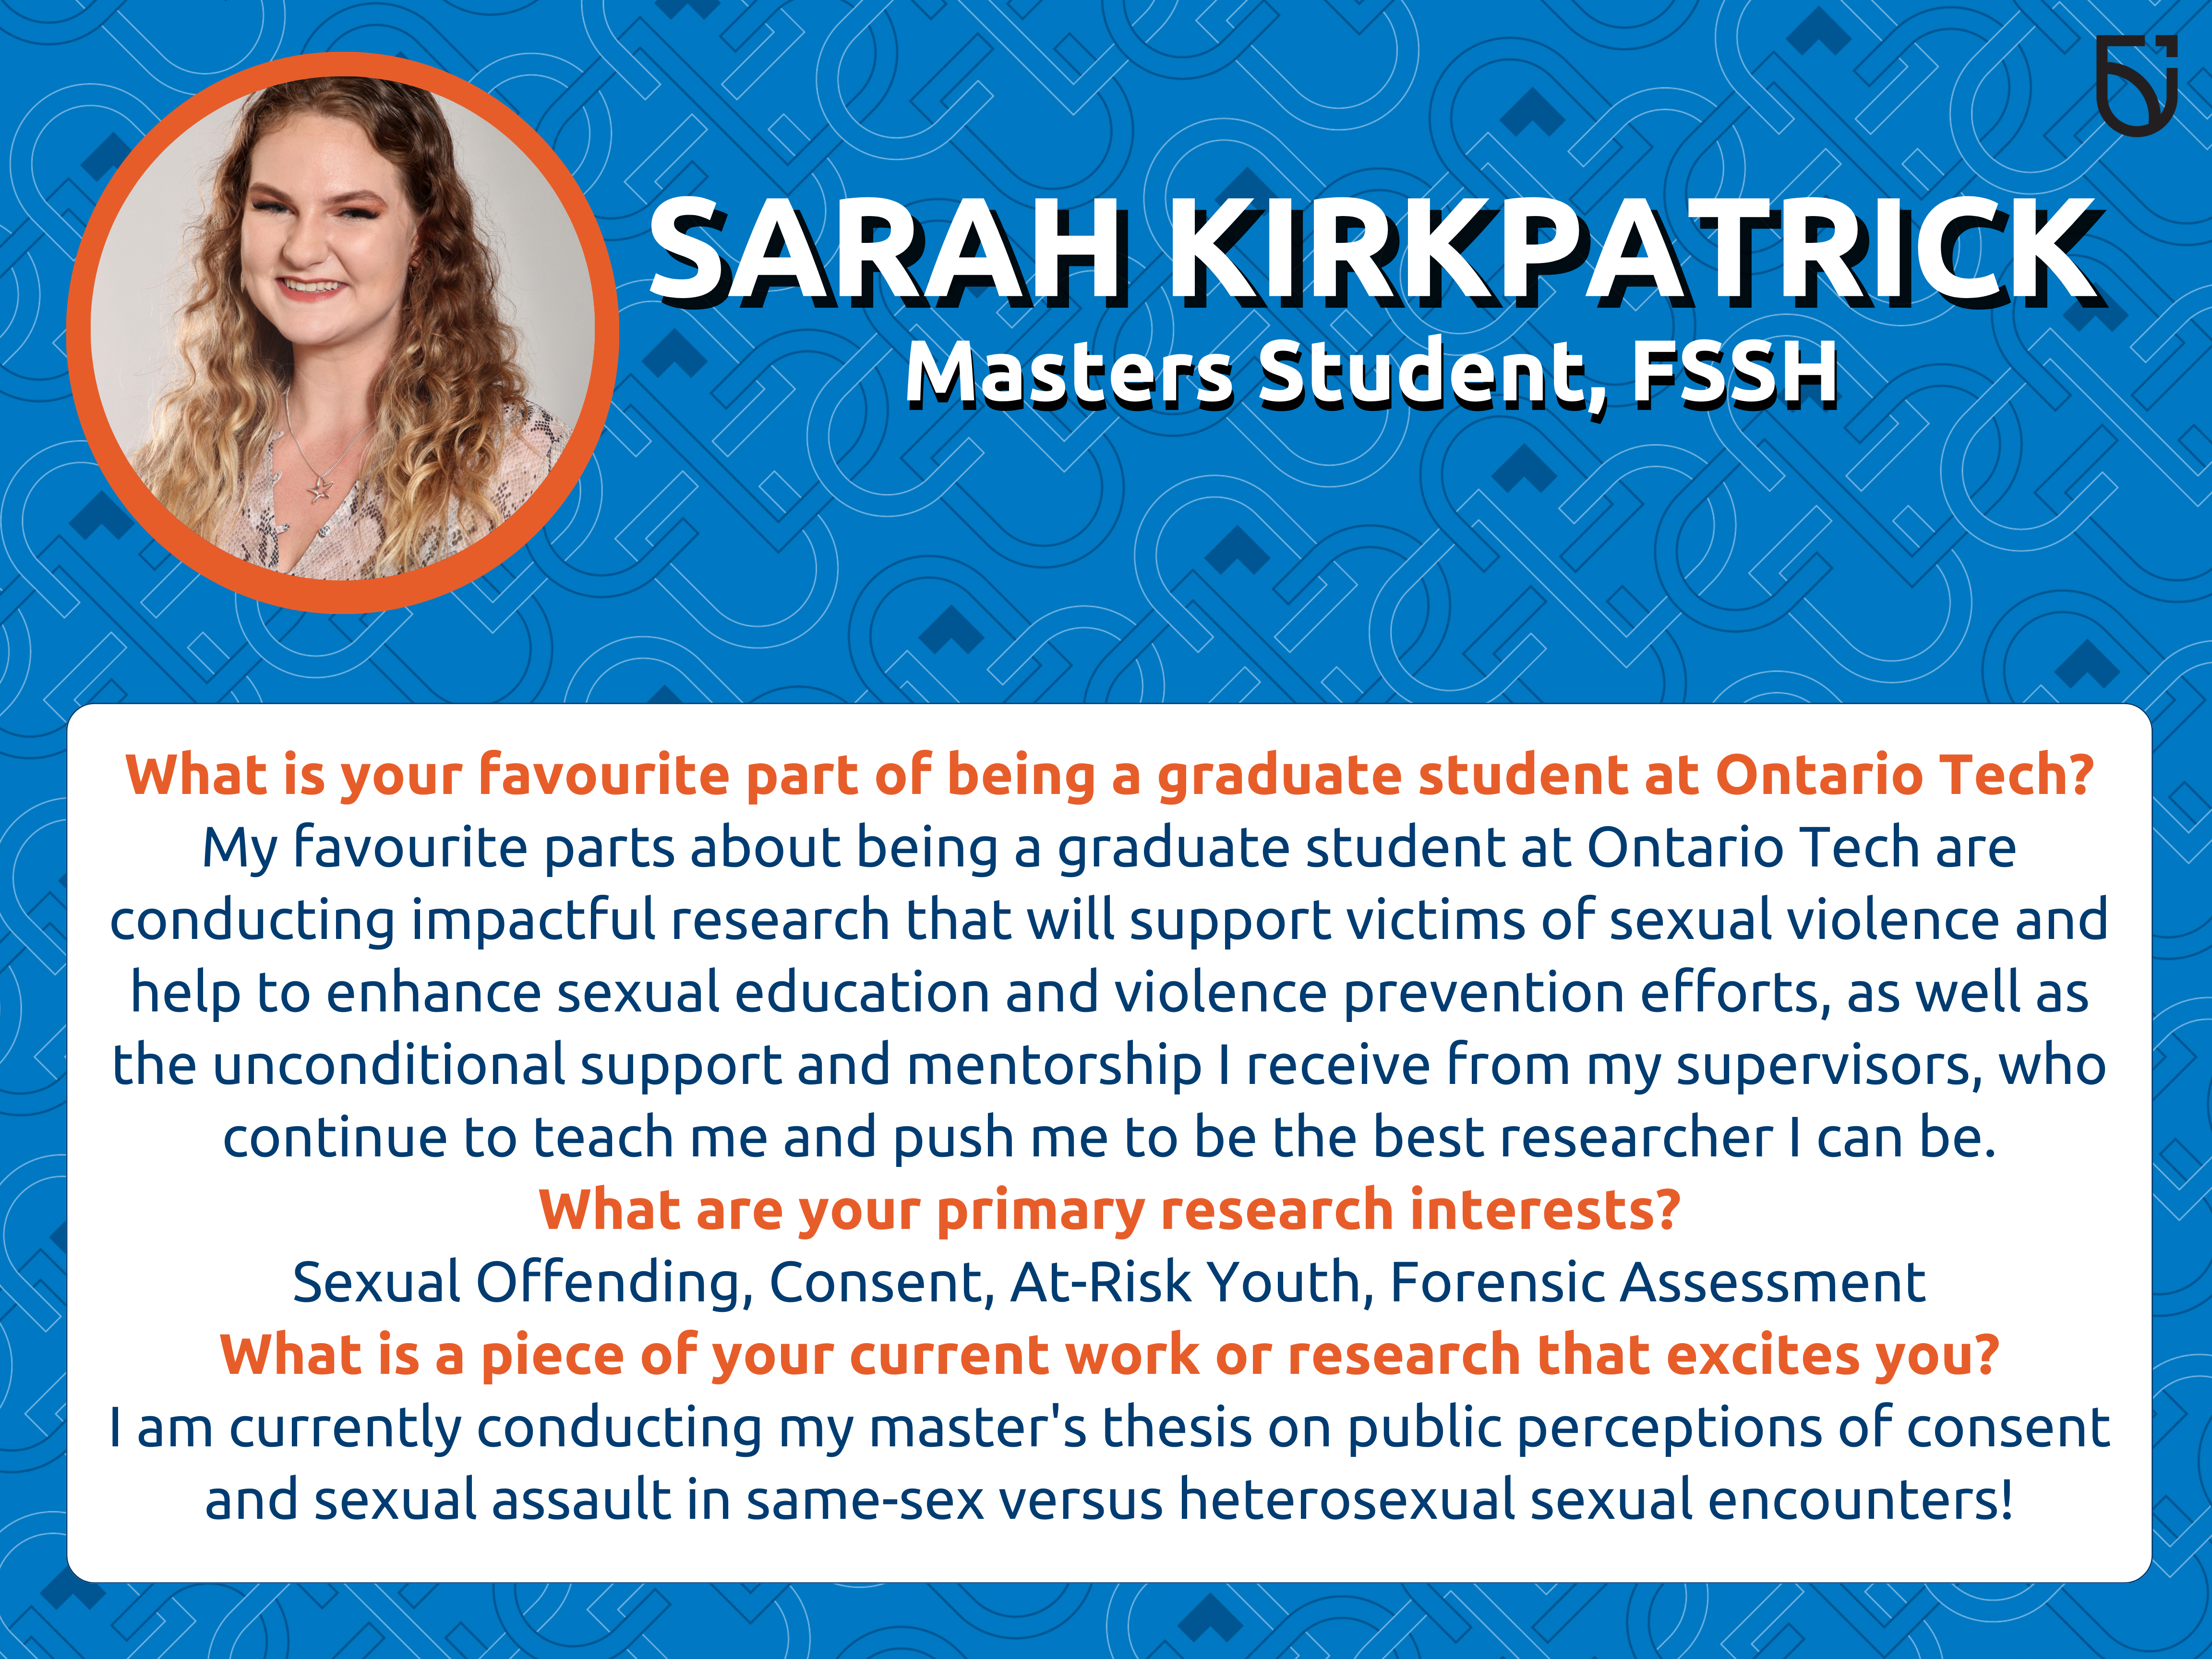 This photo is a Women’s Wednesday feature of Sarah Kirkpatrick, a Masters Student in the Faculty of Social Science and Humanities